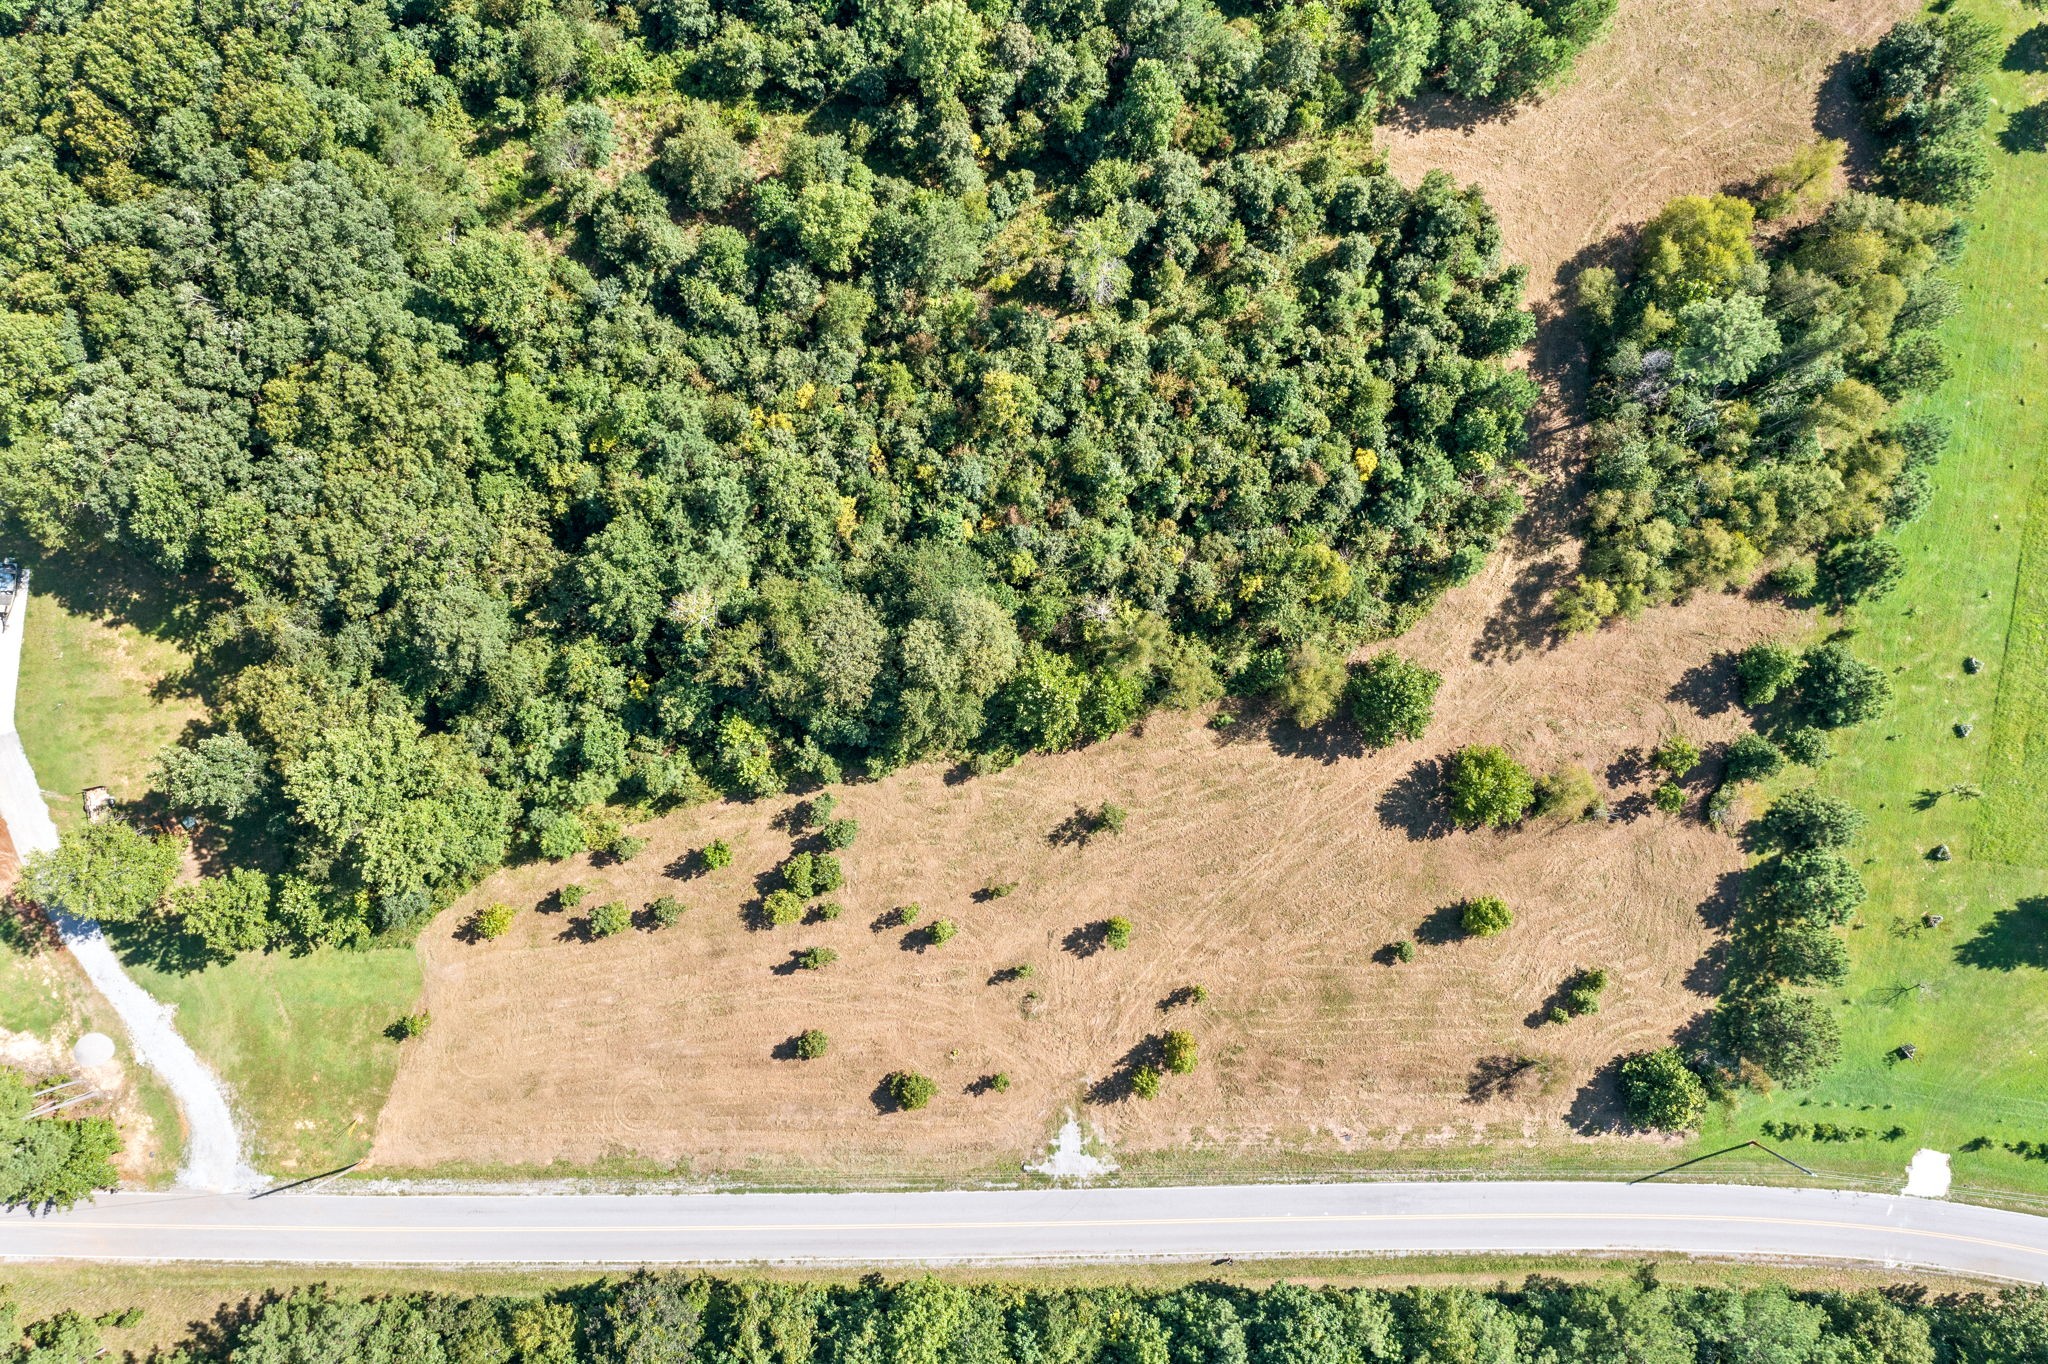 Are You Looking for Open Space or to be Nestled Under the Trees?  This Piece of Paradise in Indian Mound Has It All! 12.05 Acres with Over 400 ft of Road Frontage Per Boundary Survey dated 11/2020 - Approximately 30 minutes to Downtown Clarksville & Easy Access to Gate 10 of Fort Campbell - Seasonal Stream - Sellers put in Culvert for Easy Access to the Property